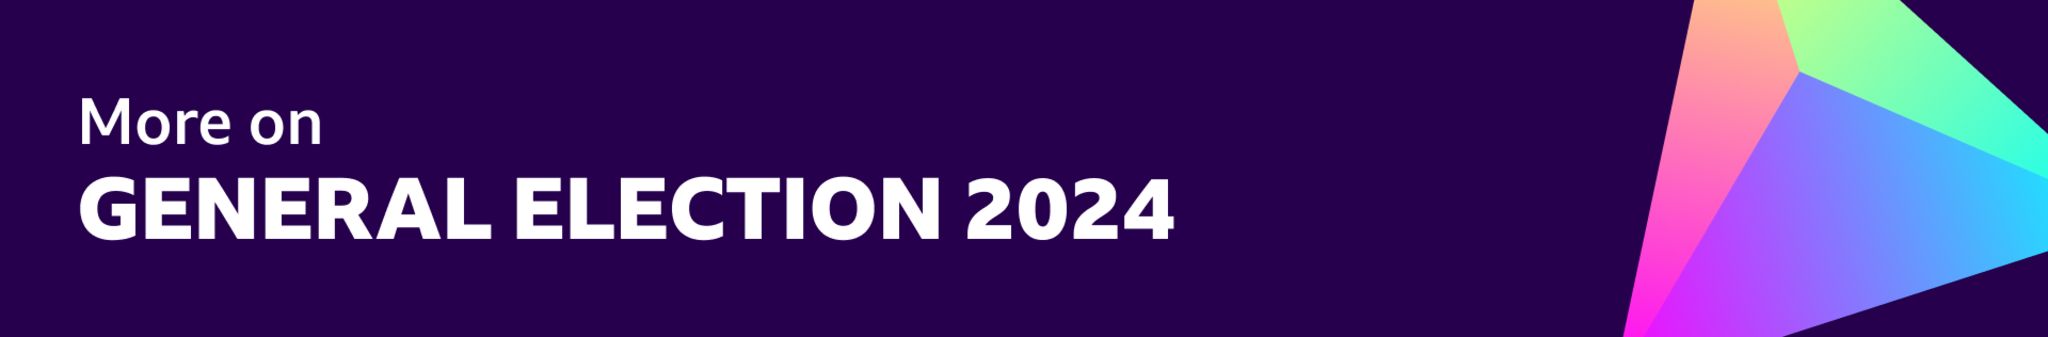 Banner saying 'More on general election 2024'